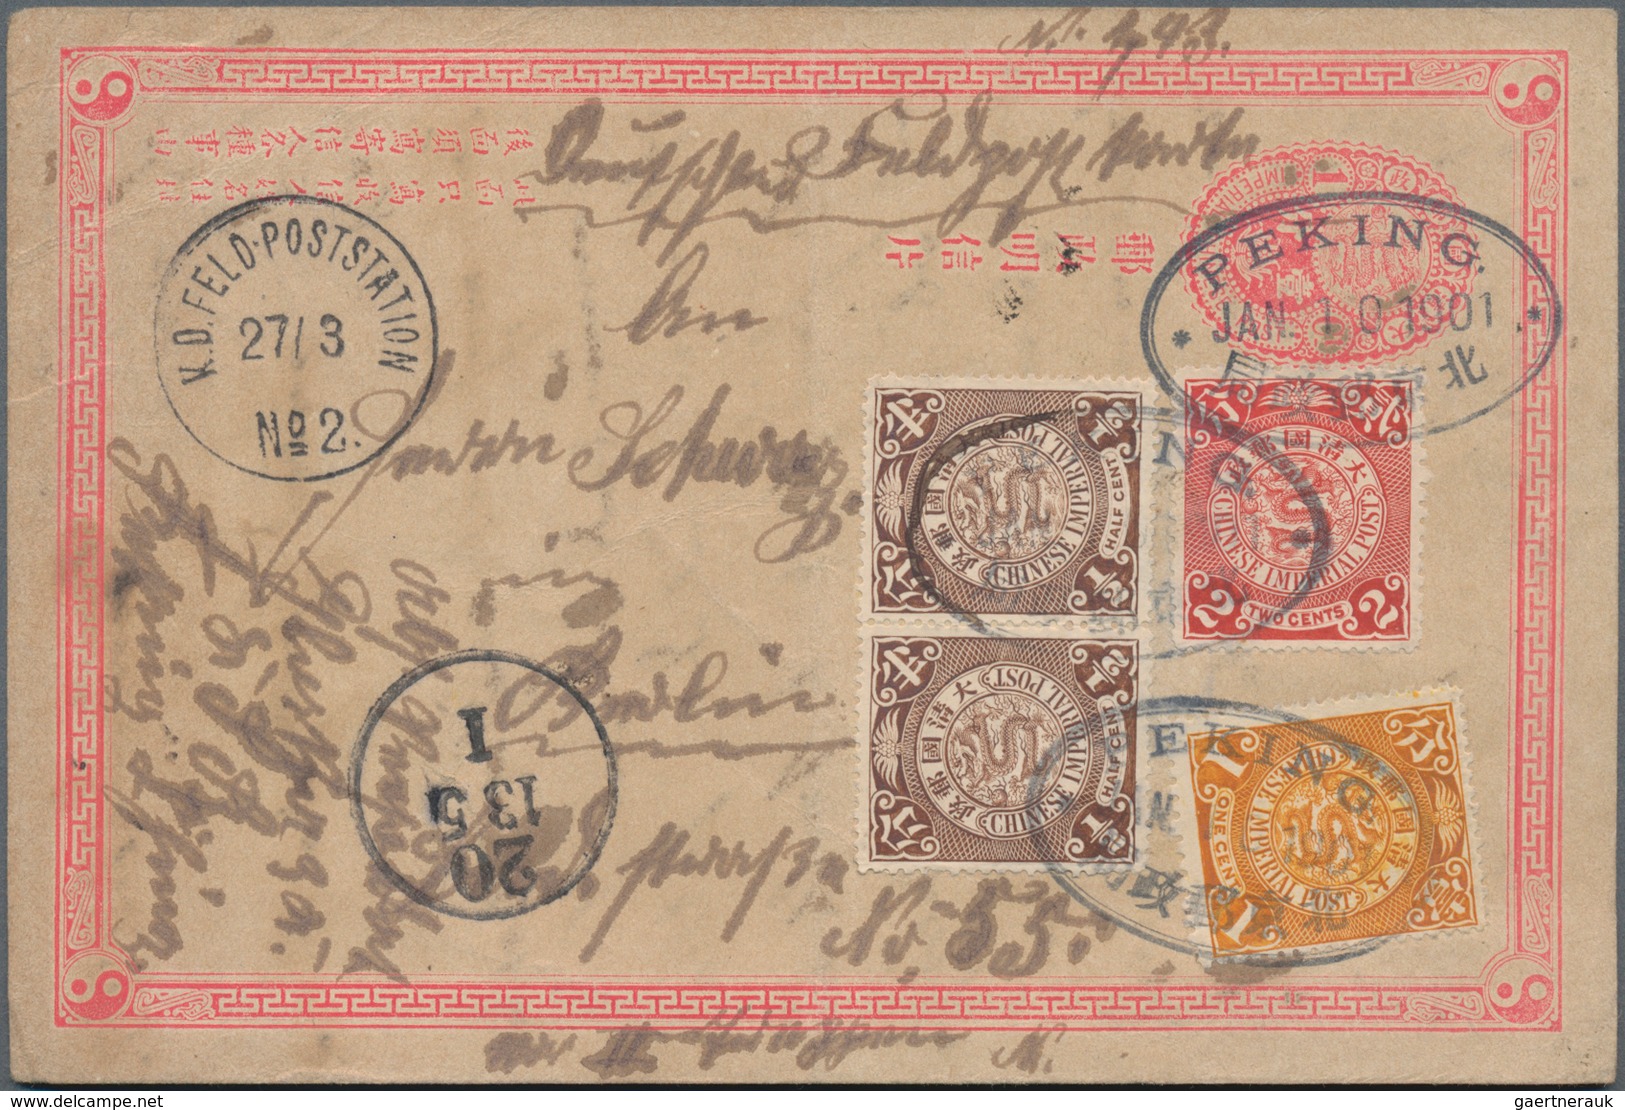 China - Ganzsachen: 1897/98, Cards ICP (2) Or CIP Reply Part Used As German Field Post Cards Or Mess - Cartes Postales